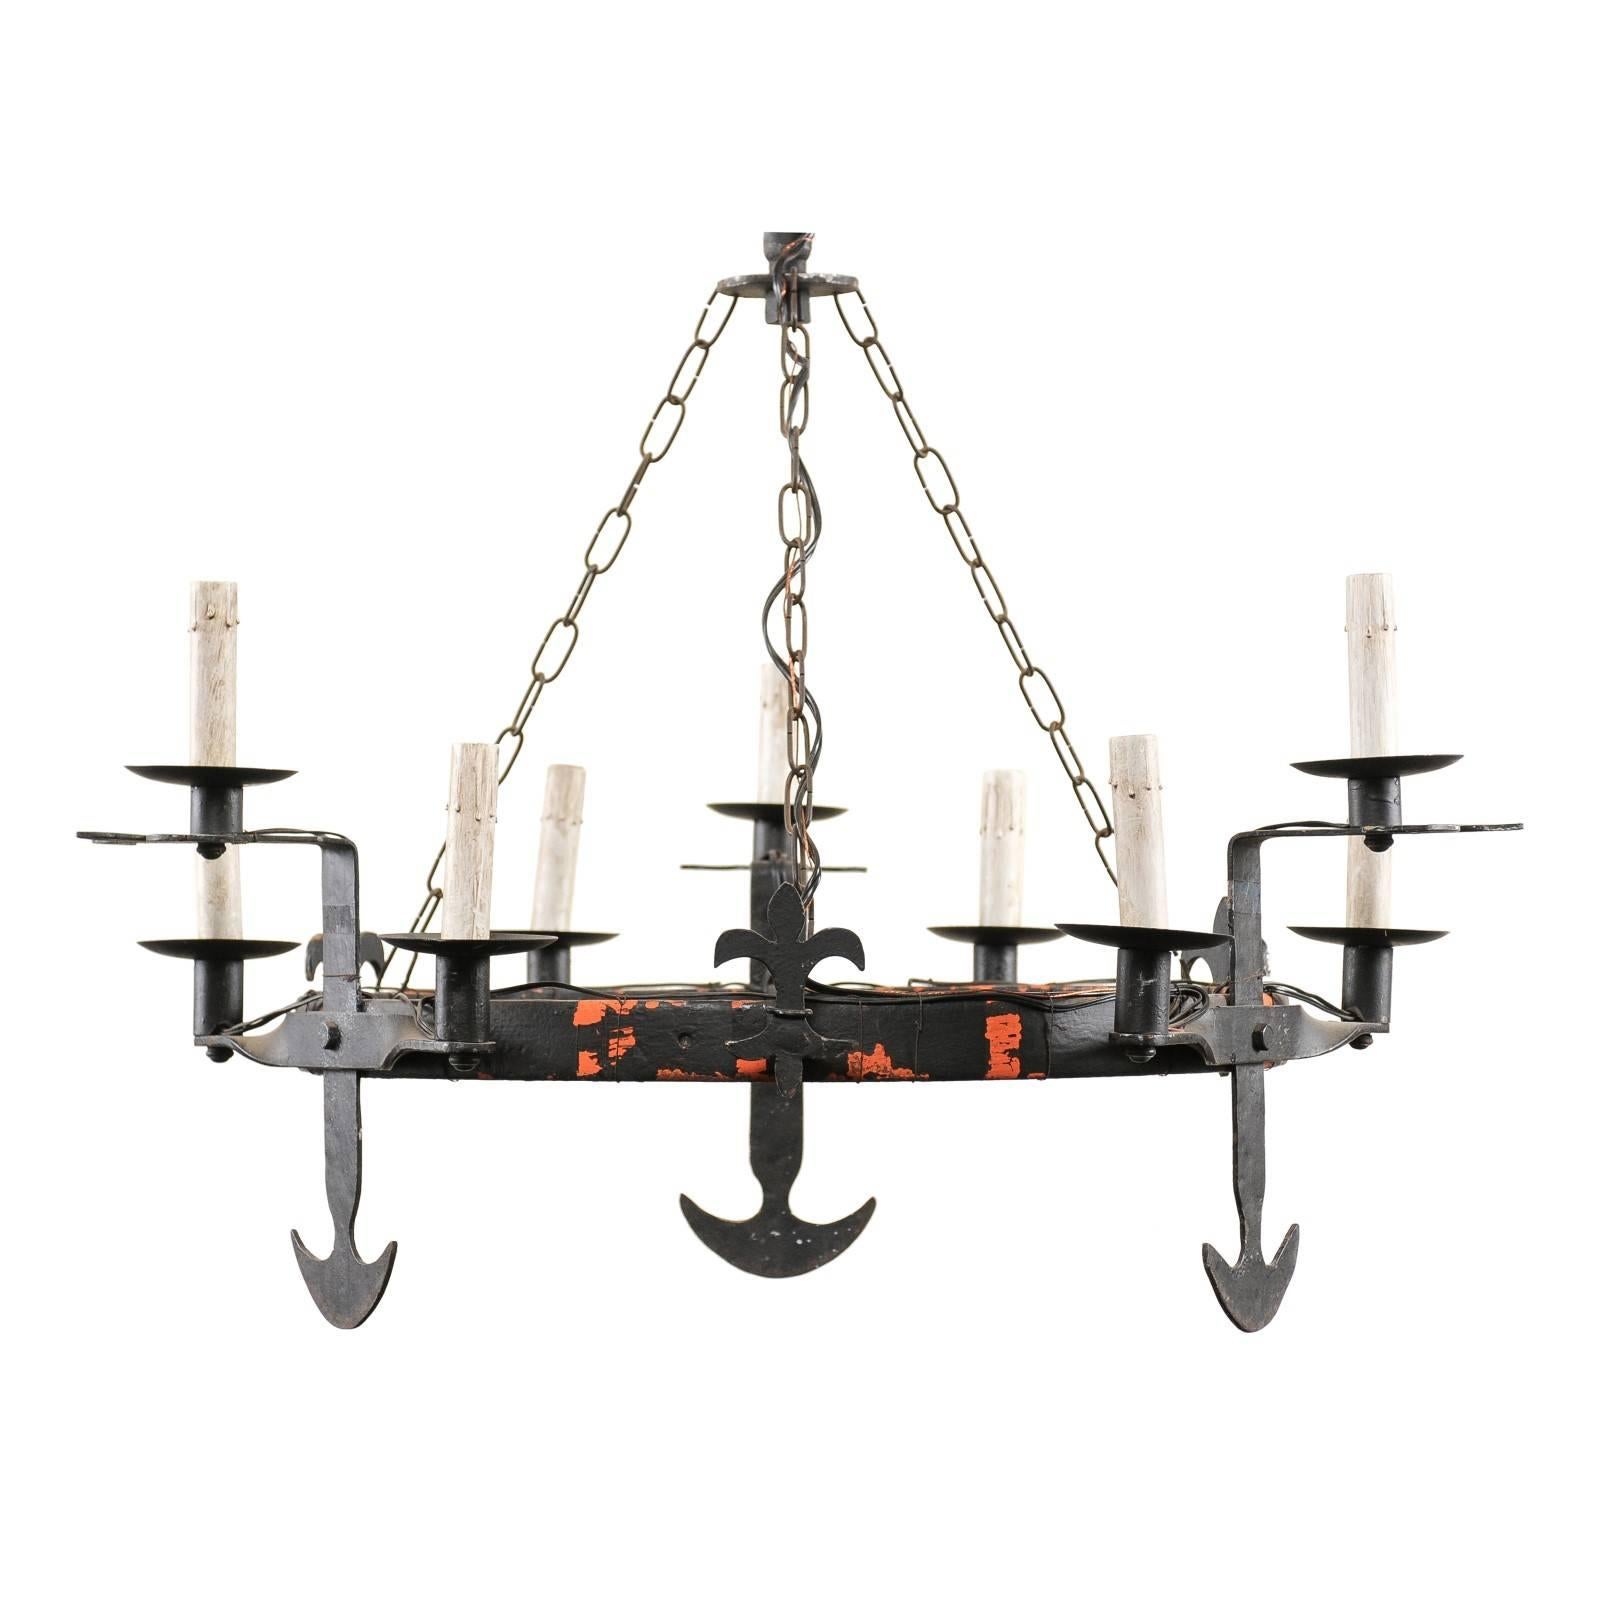 French Ring Shaped Iron Chandelier from the Mid-20th Century with Anchor Motifs For Sale